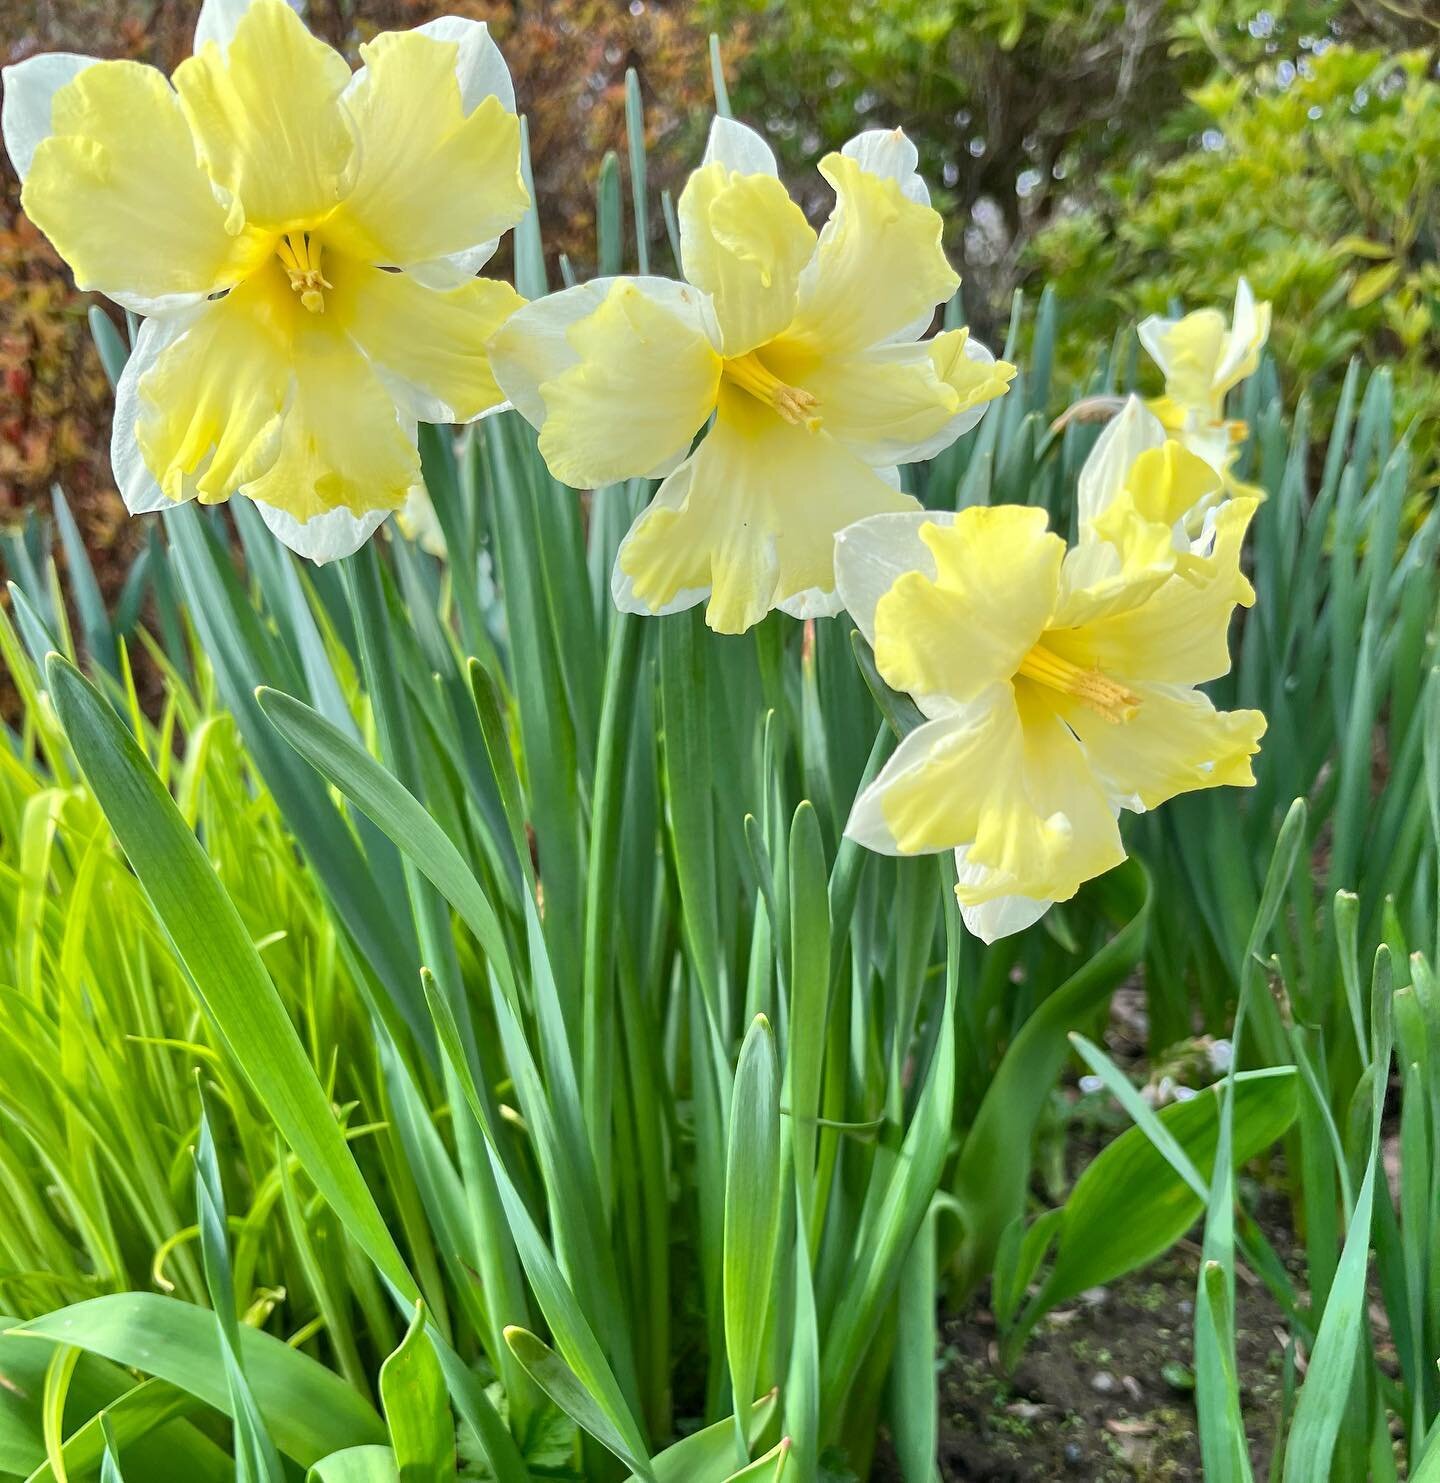 Happy Easter from all of us at The Yair 🐣🐣🐣🐣
.
.
.
#happyeaster #easterwishes #🐣 #daffodils #springtime #theyairscotland #holidaycottages #scottishborders